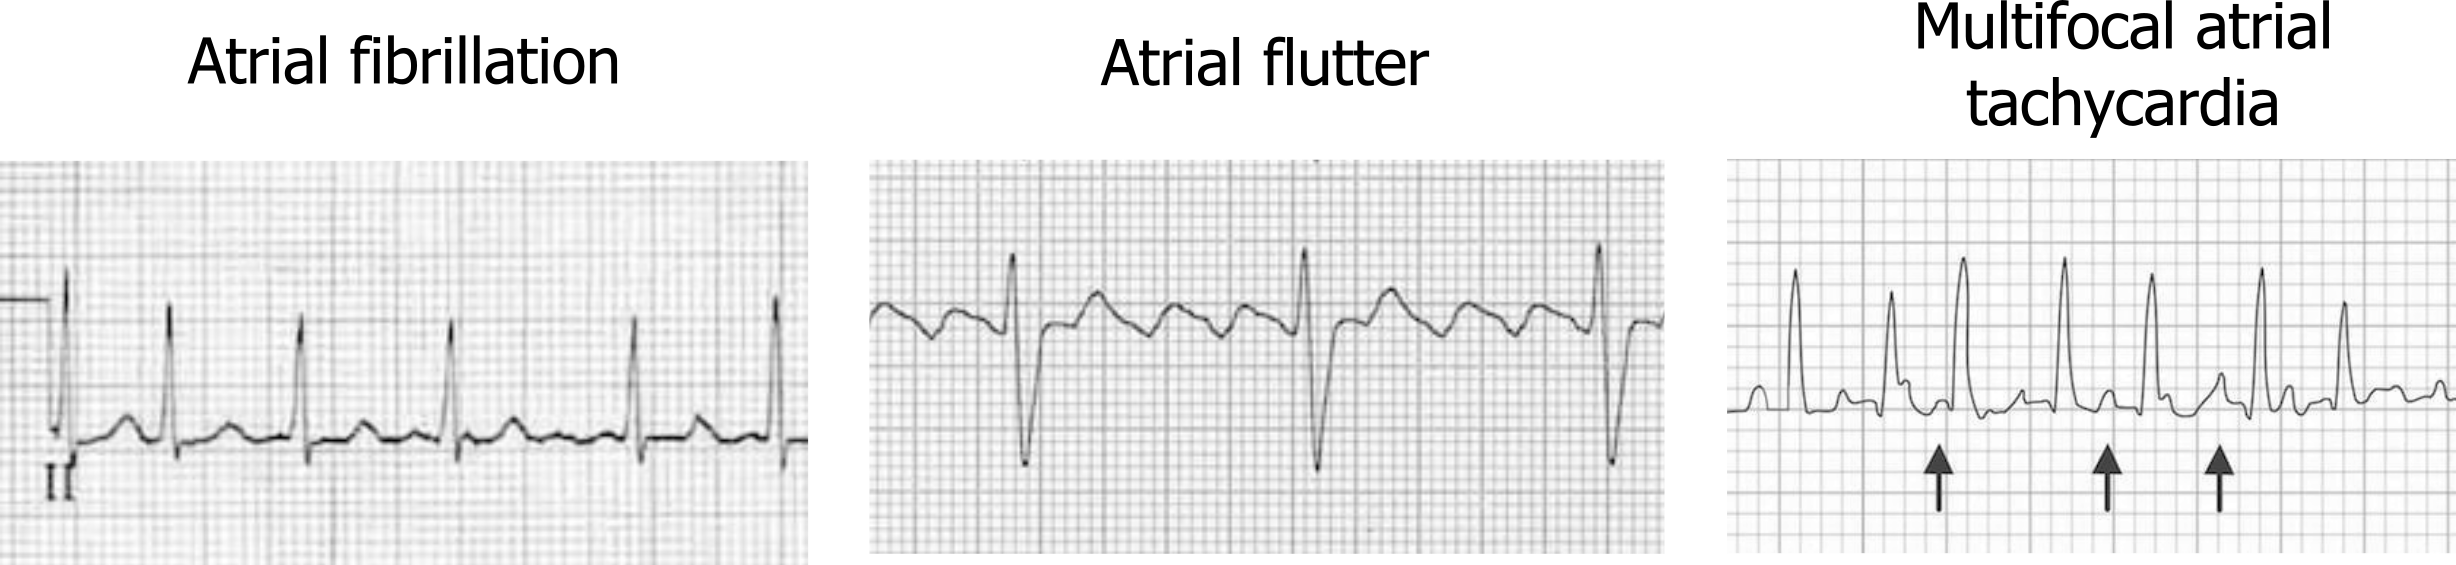 Atrial fibrillation (afib) shows lack of P-waves; atrial fibrillation (aflutter) has regular QRS complexes and sawtooth patterns which resemble P-waves but there are too many of them; Multifocal atrial tachycardia (MAT): P-waves are present but they have different shapes reflecting their different origins in the atrial wall. Each of the P-waves is followed by a QRS complex.